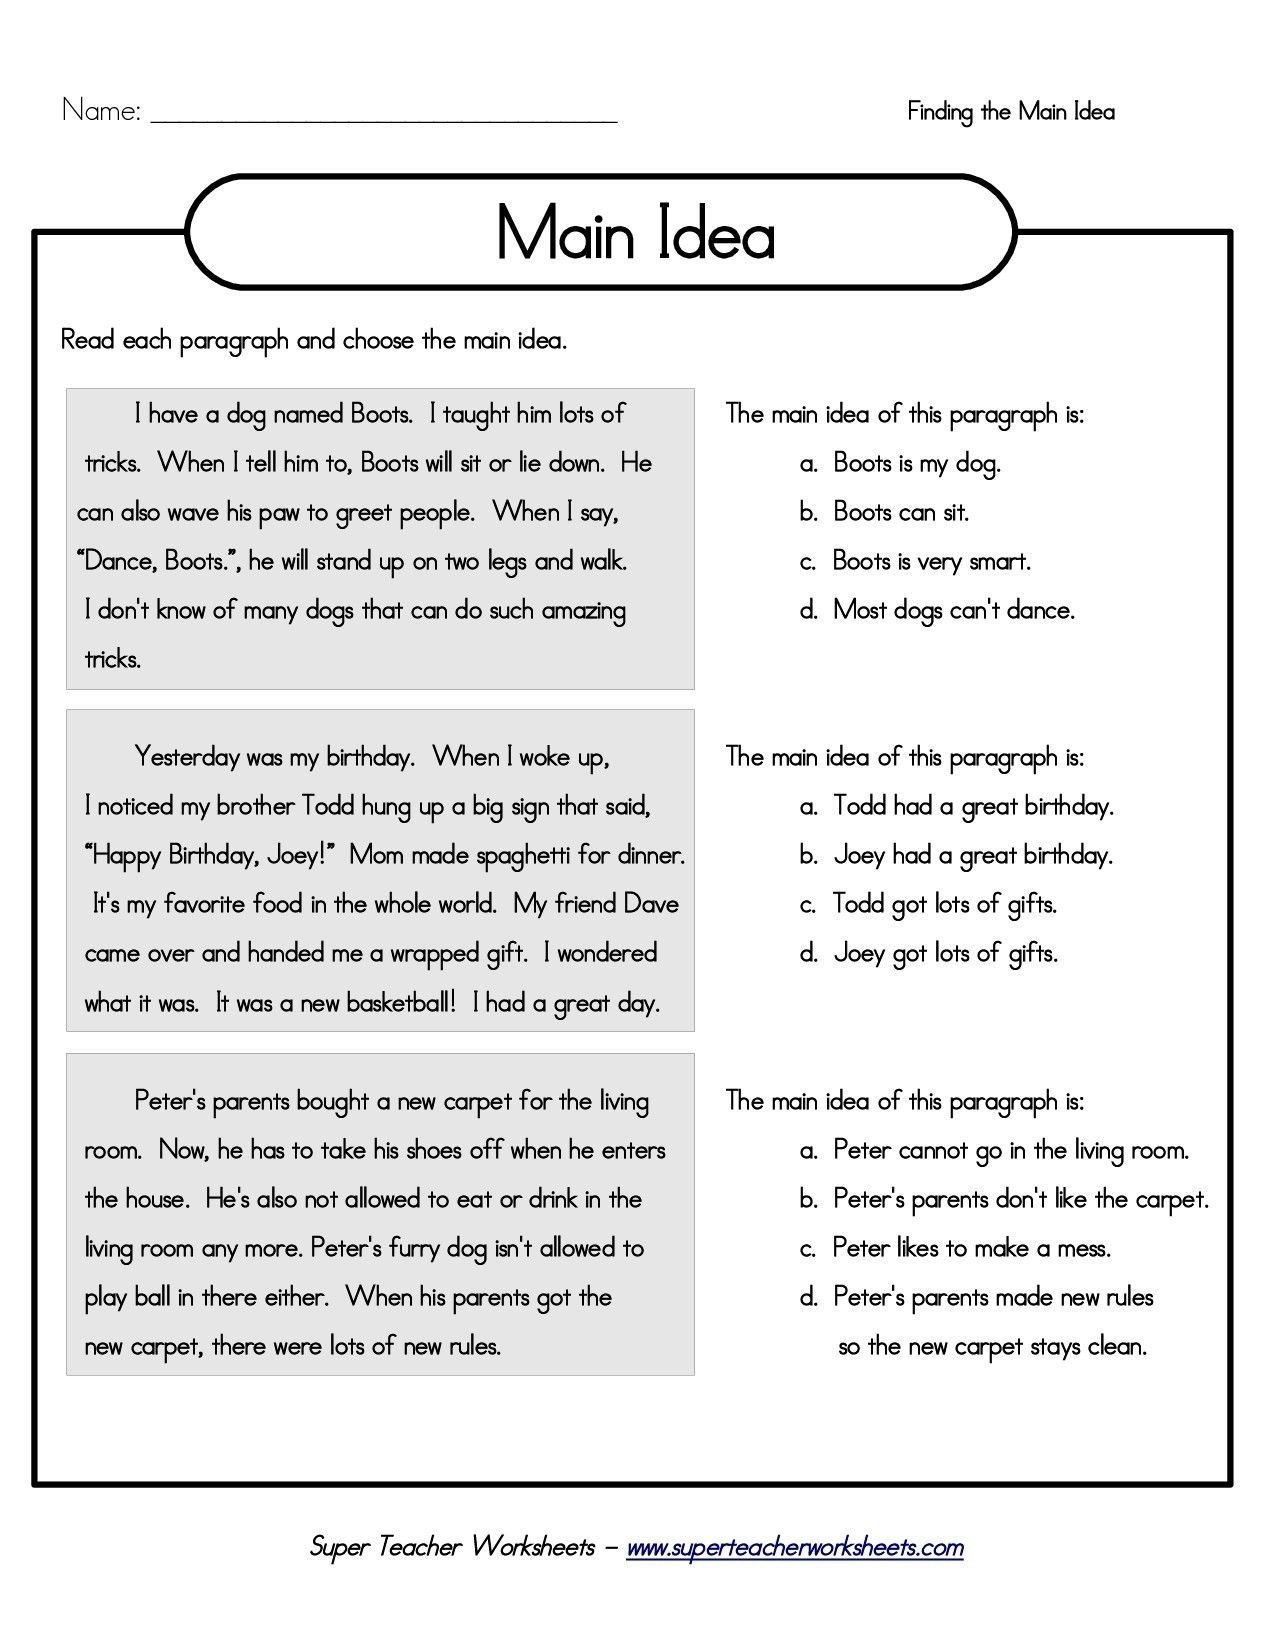 10 Spectacular Main Idea Worksheets For 5Th Grade printable 5th grade main idea worksheets main idea and details 43 2023